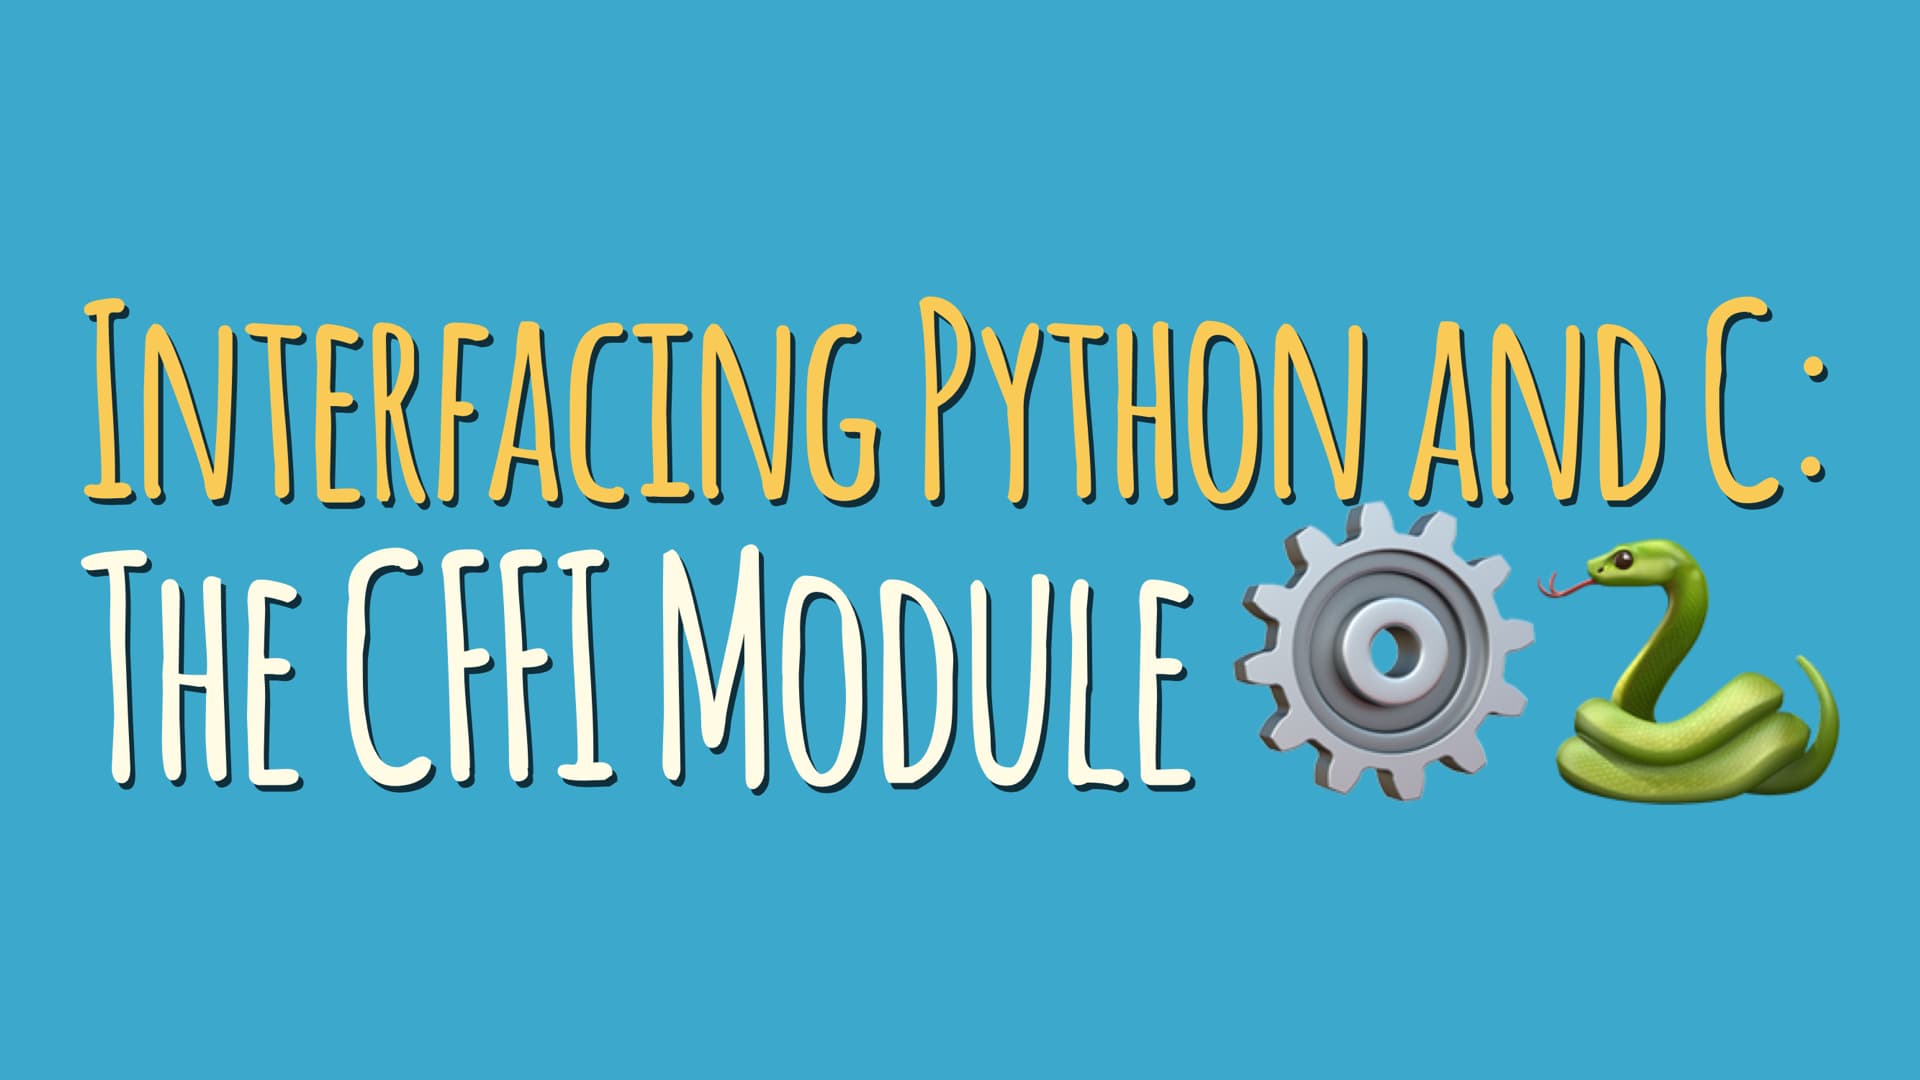 Python and the CFFI module